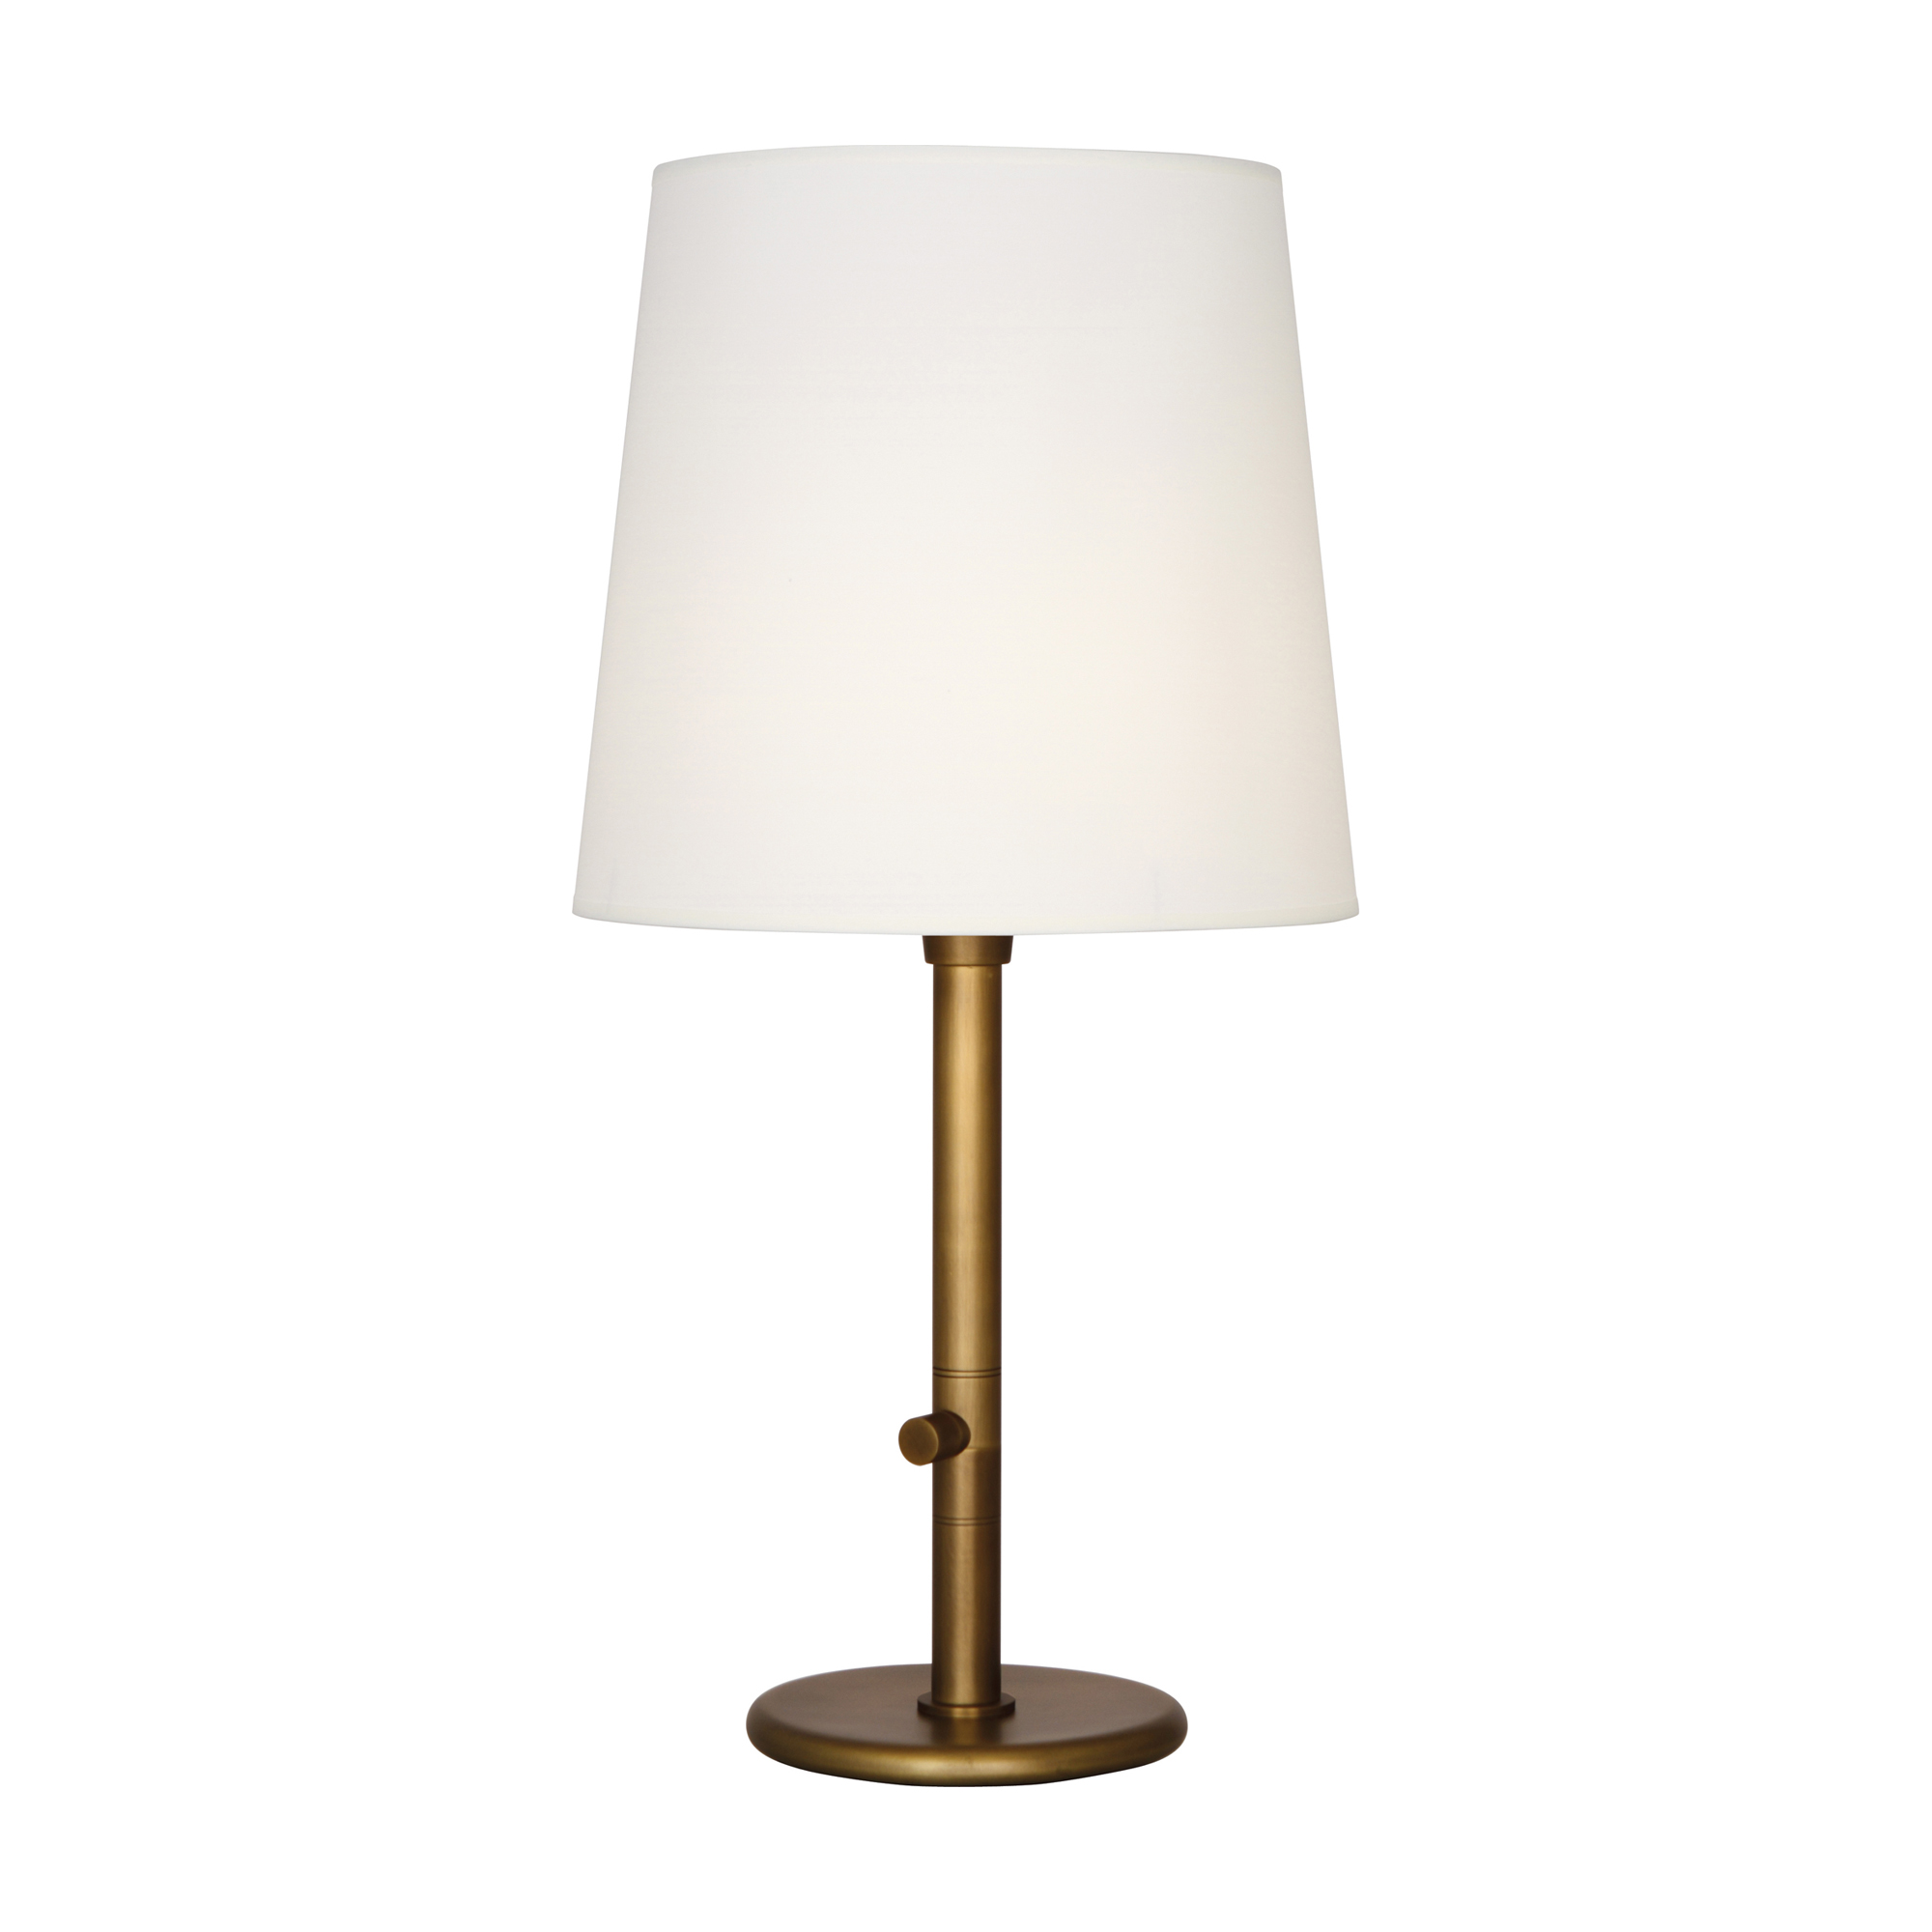 Rico Espinet Buster Chica Accent Lamp